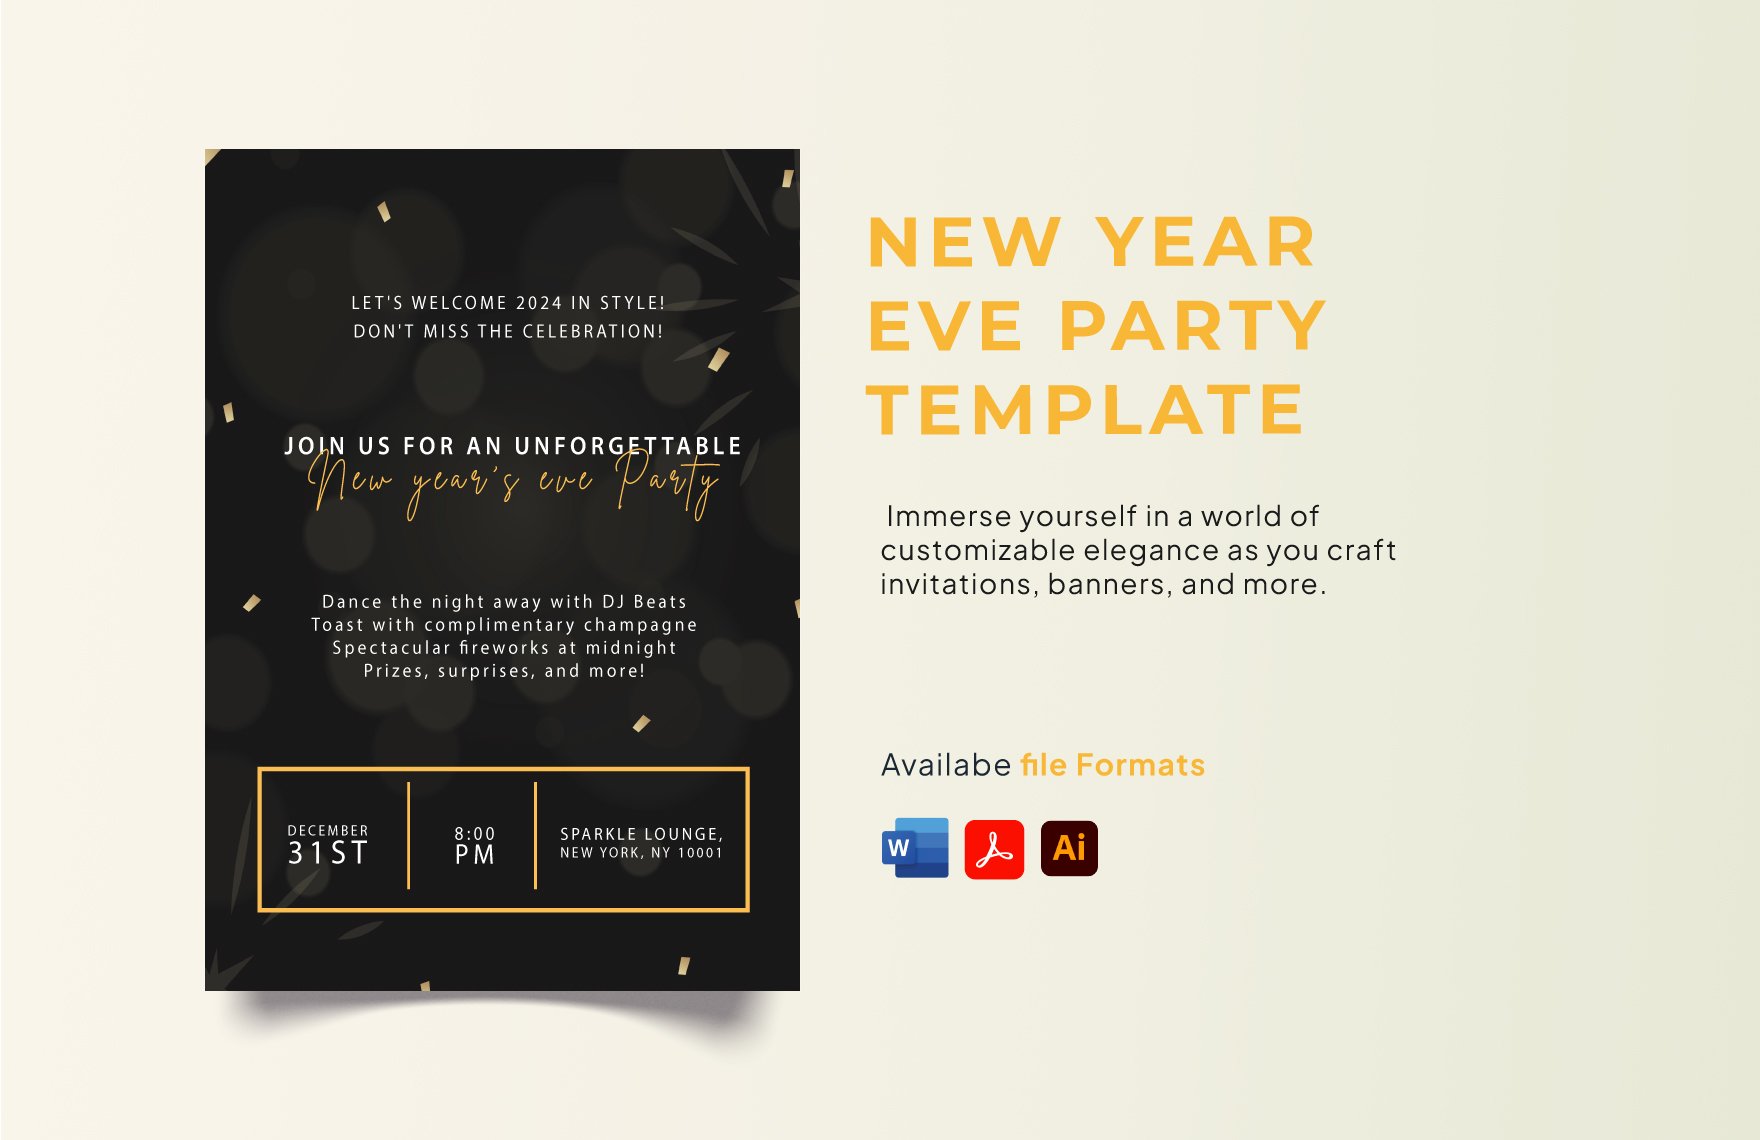 New Year Eve Party Template